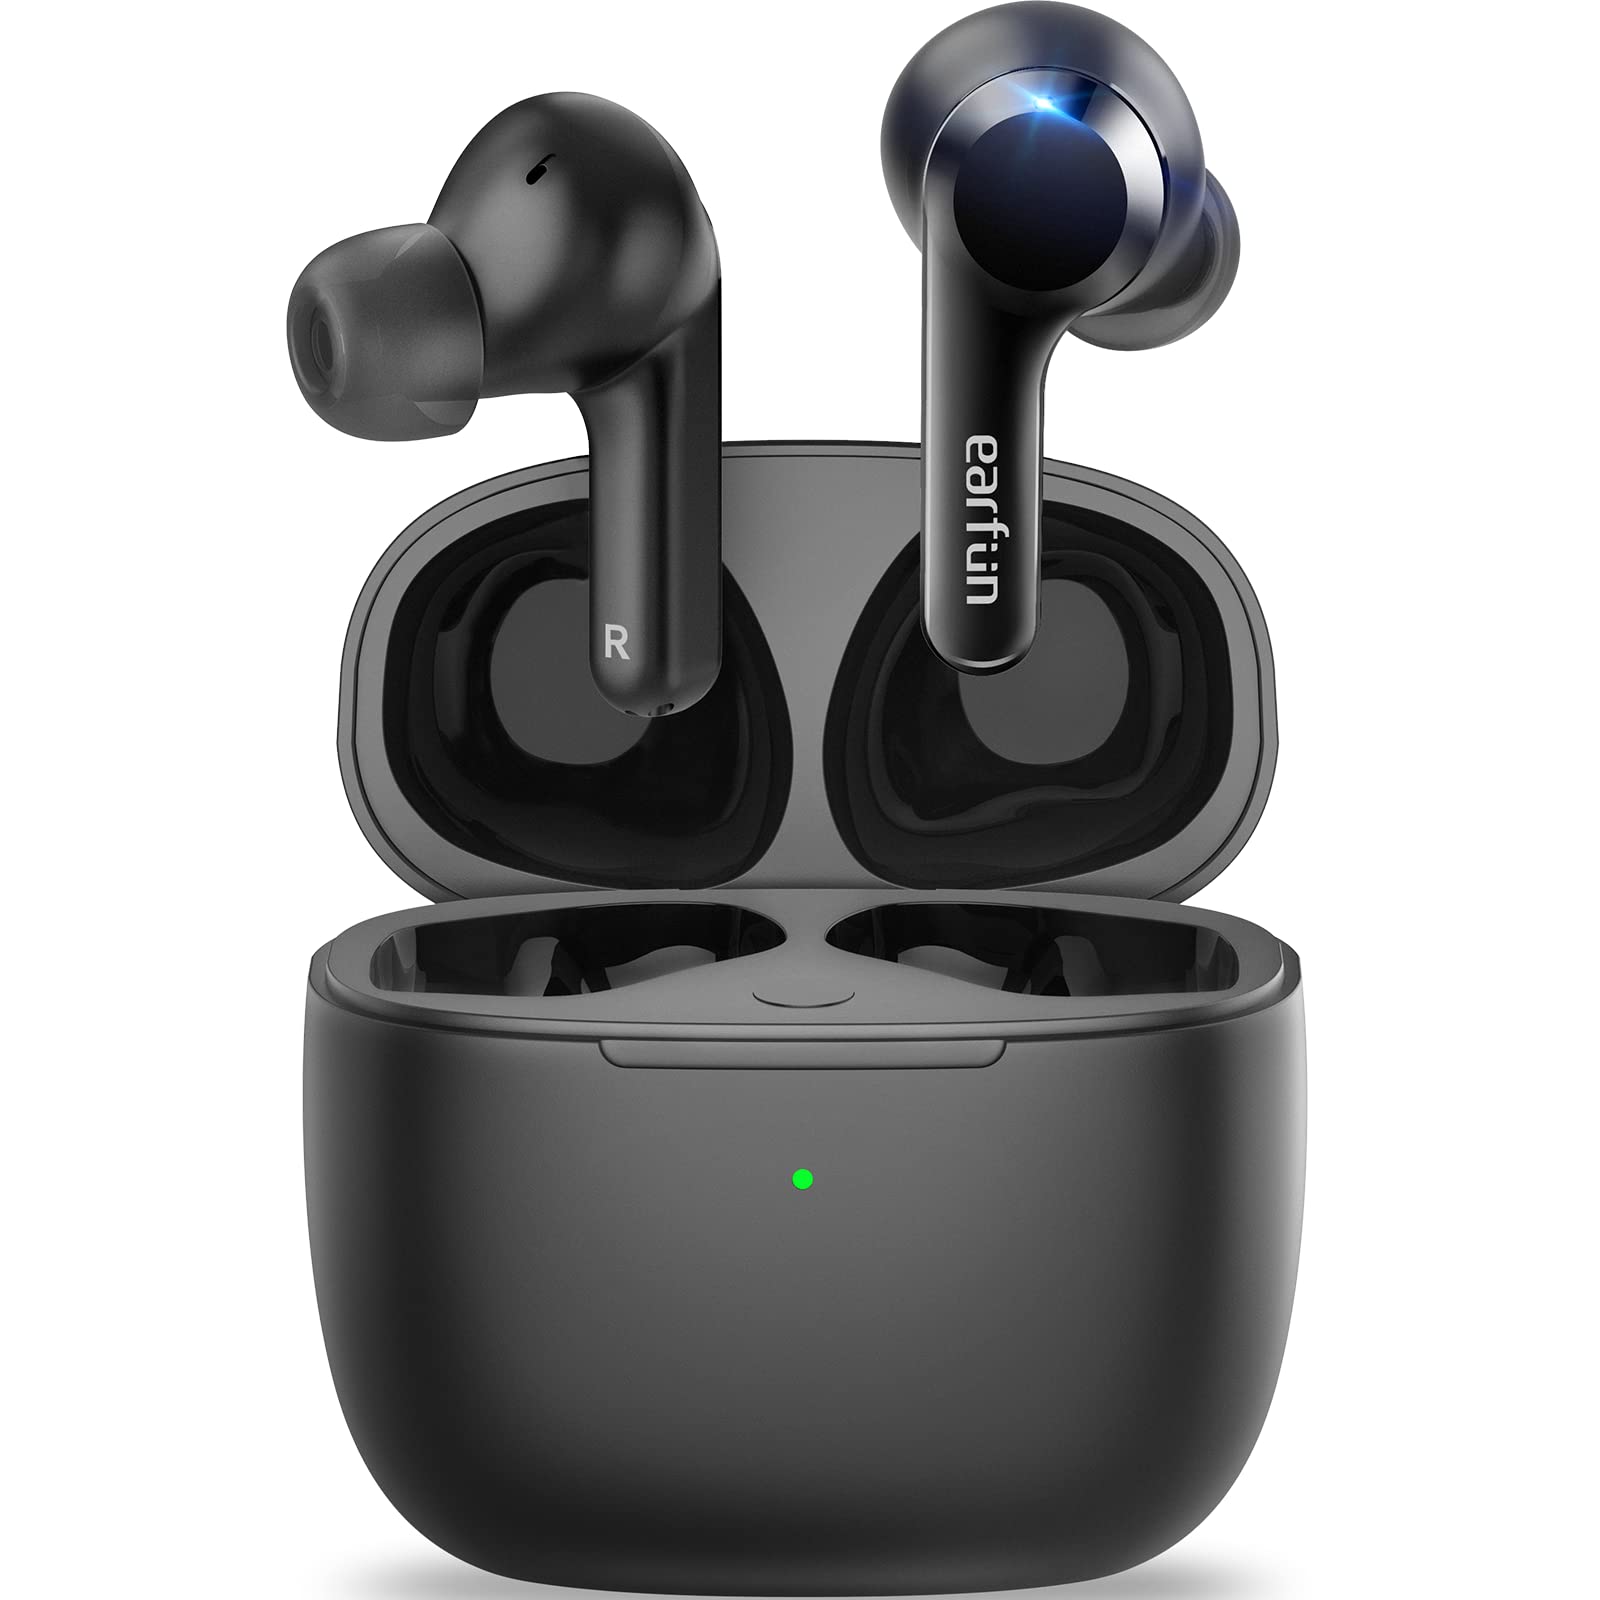 EarFun Air Wireless Earbuds, [Upgraded Version] [What Hi-Fi Awards] Bluetooth Earbuds with 4 Mics, Sweatshield IPX7 Waterproof, Game Mode, Wireless Charging, Deep Bass, USB-C Fast Charge, 35Hrs, Black